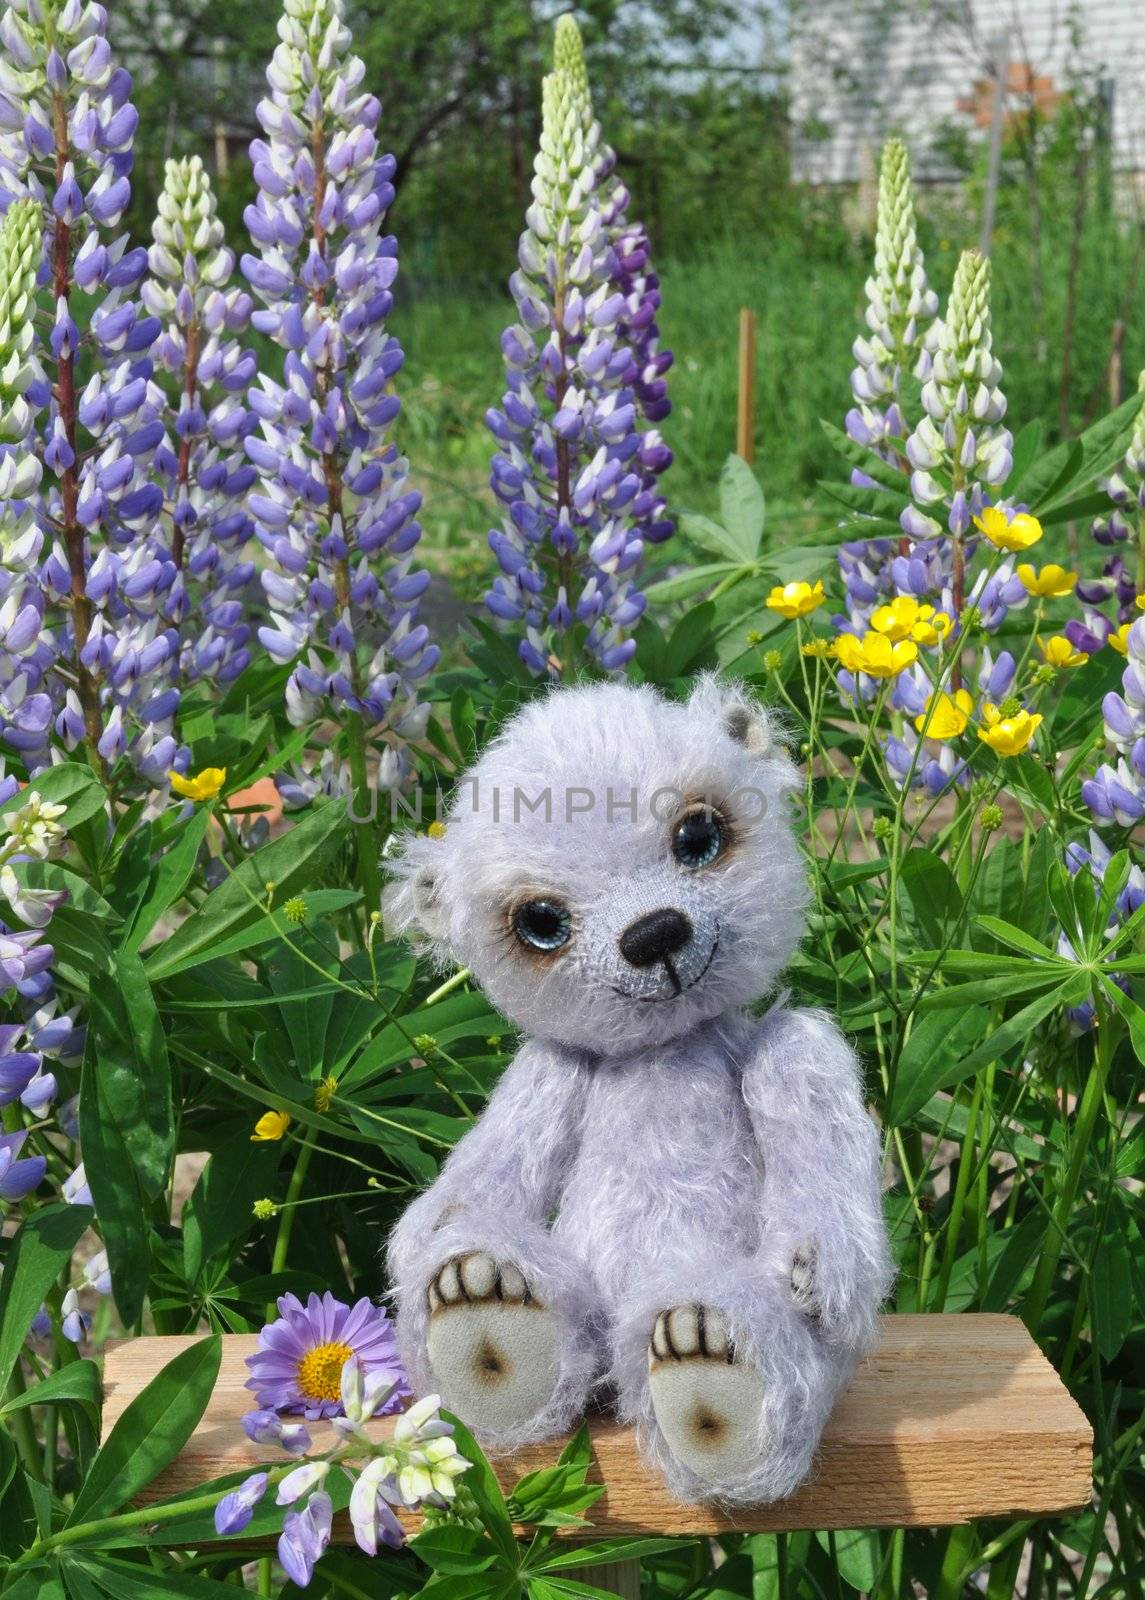 Handmade, the sewed toy: teddy bear Chupa on a little board among flowers lupine and buttercups